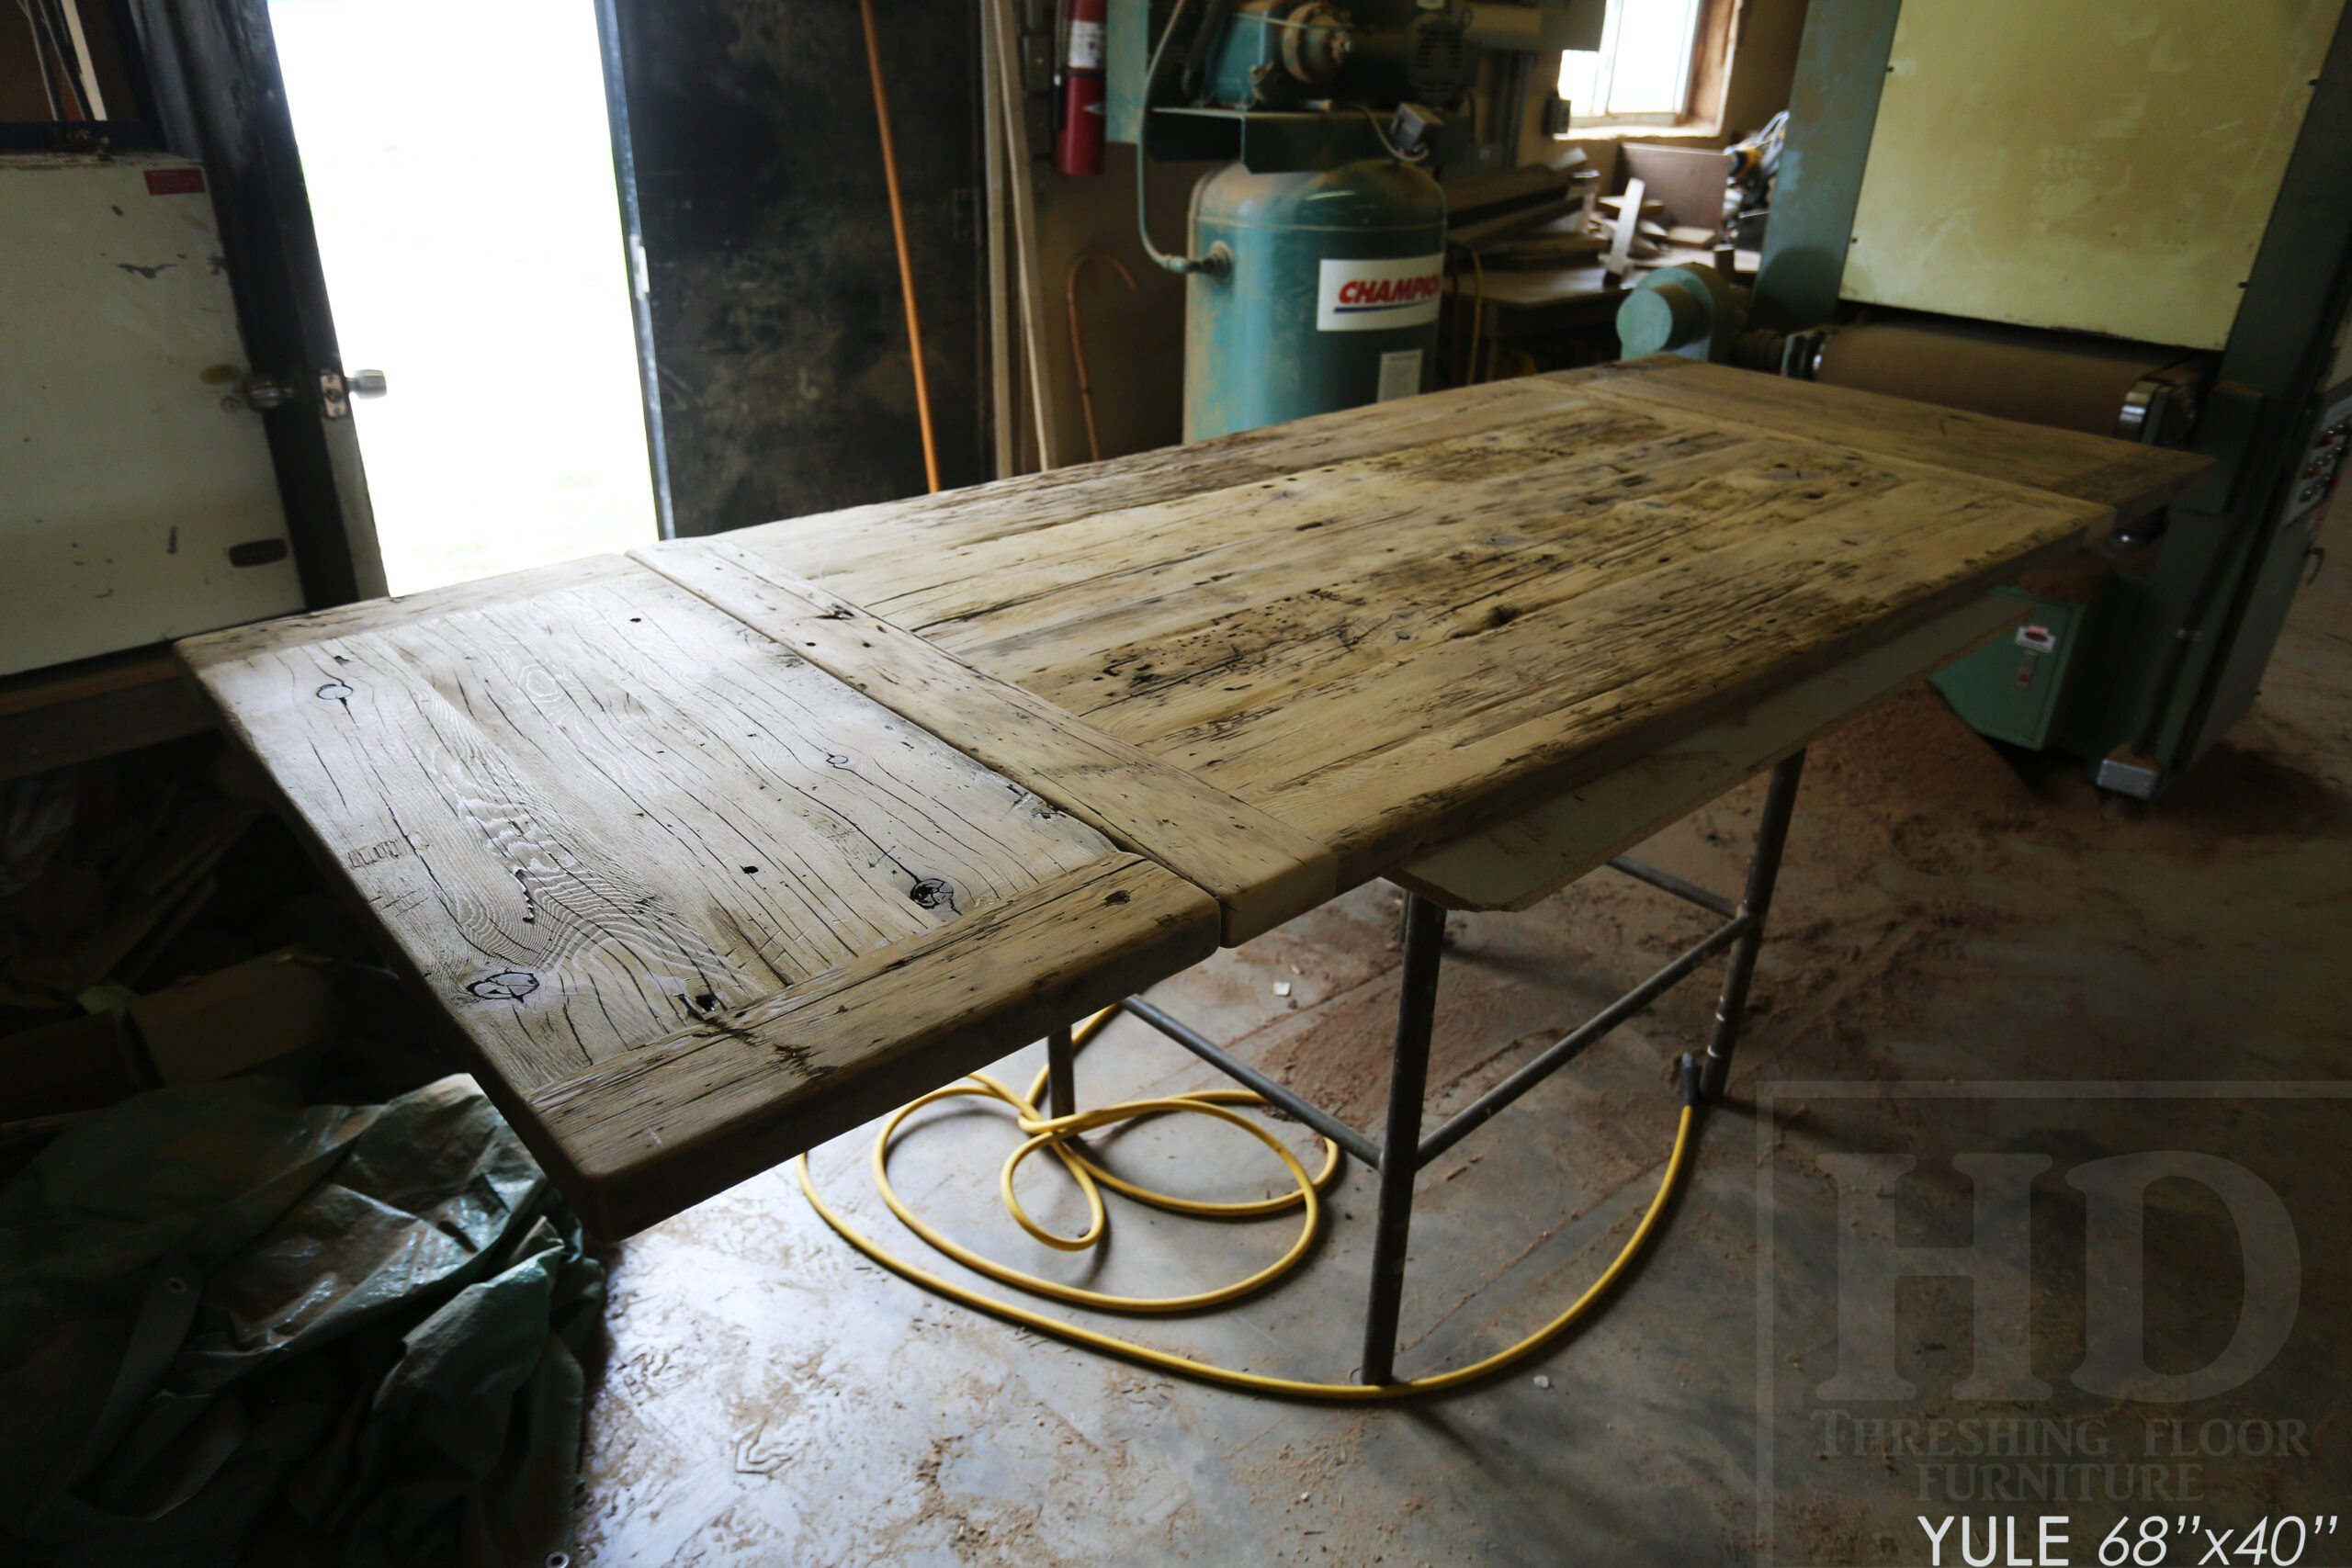 68" Ontario Barnwood Table we made for an Kitchener, Ontario home - 40" wide - Matte Black X Base - 2" Hemlock Threshing Floor Top -  Original edges & distressing maintained - Premium epoxy + satin polyurethane finish - Two 18" Leaves - 68" [matching] Reclaimed Wood Bench - www.table.ca